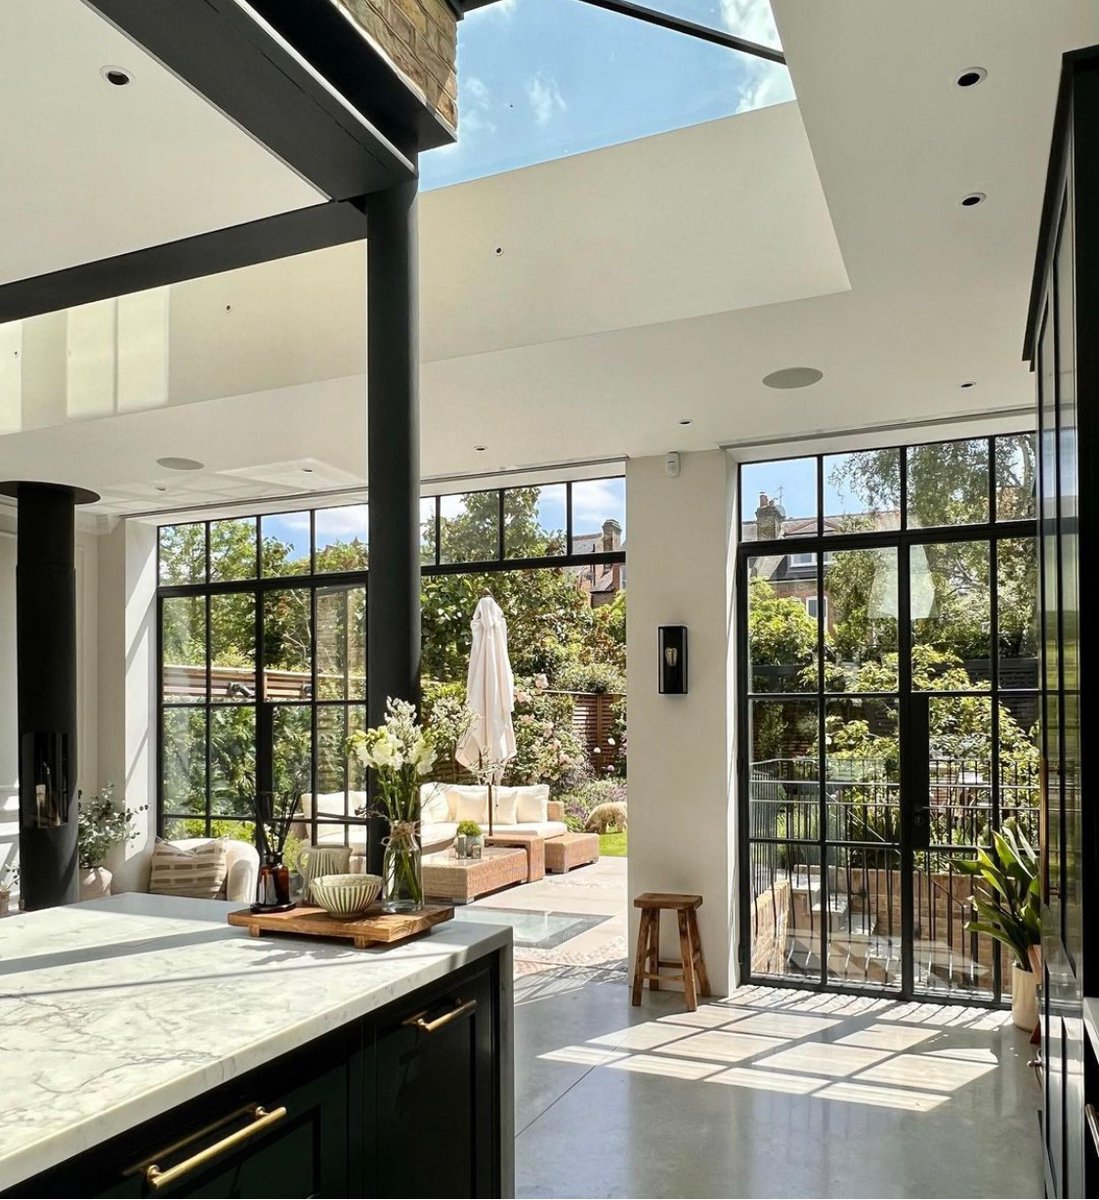 B R I G H T

From the way the roof light wraps around to really accentuate the division between old and new to the industrial crittall doors which bring in further expanses of light & characterful patterns of shadows this kitchen design is objectively THE DREAM.

📸hemptonhouse